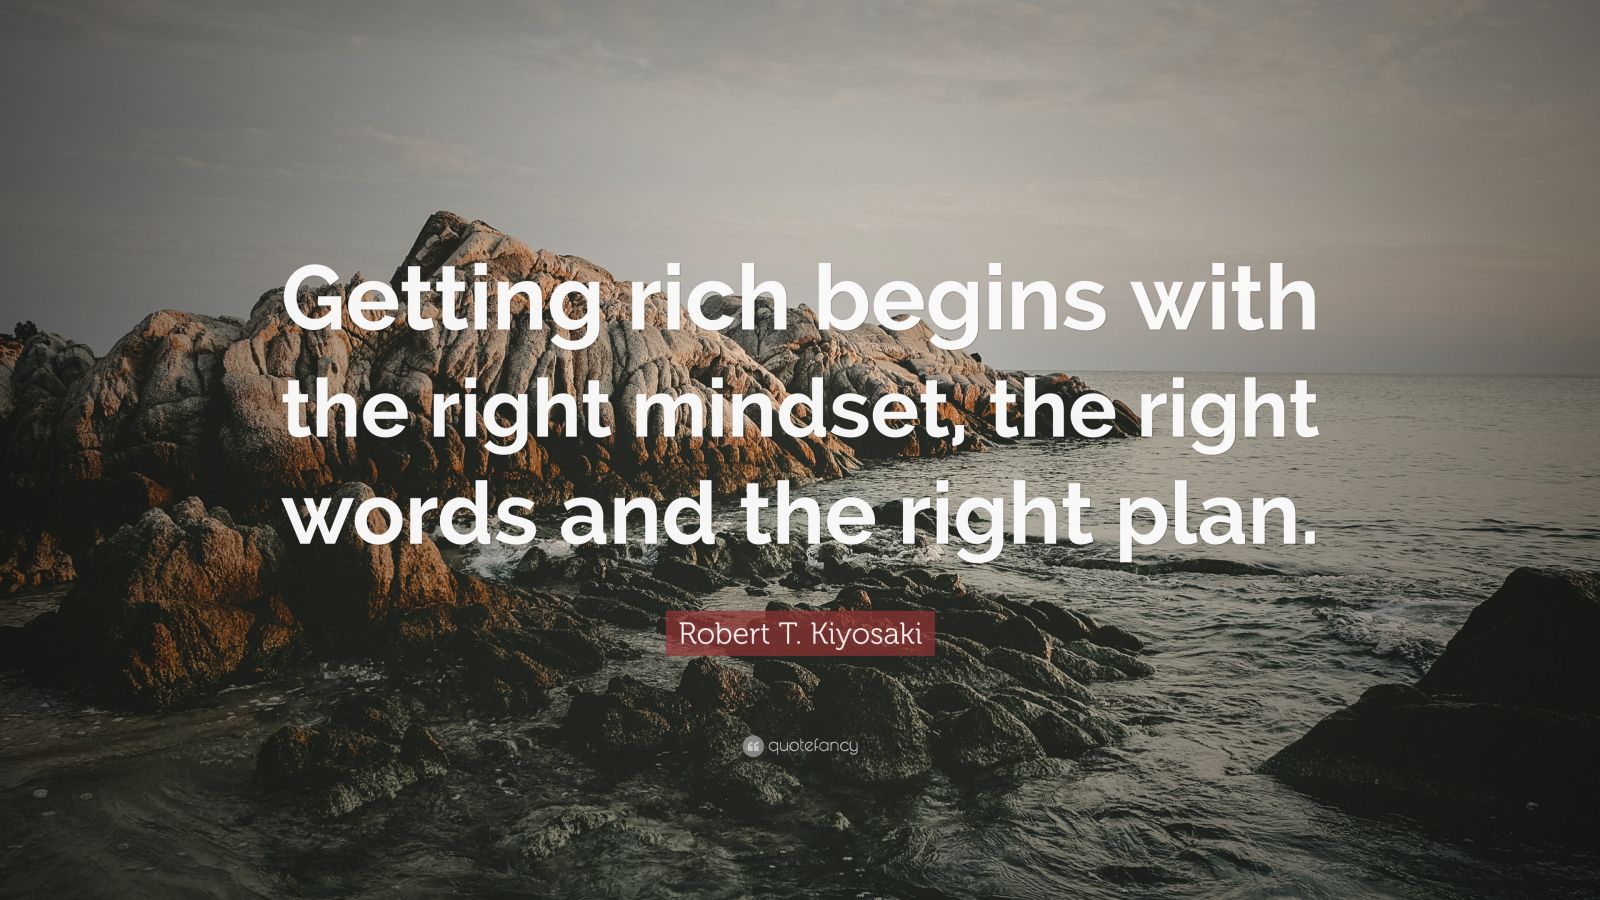 Robert T. Kiyosaki Quote: “Getting rich begins with the right mindset